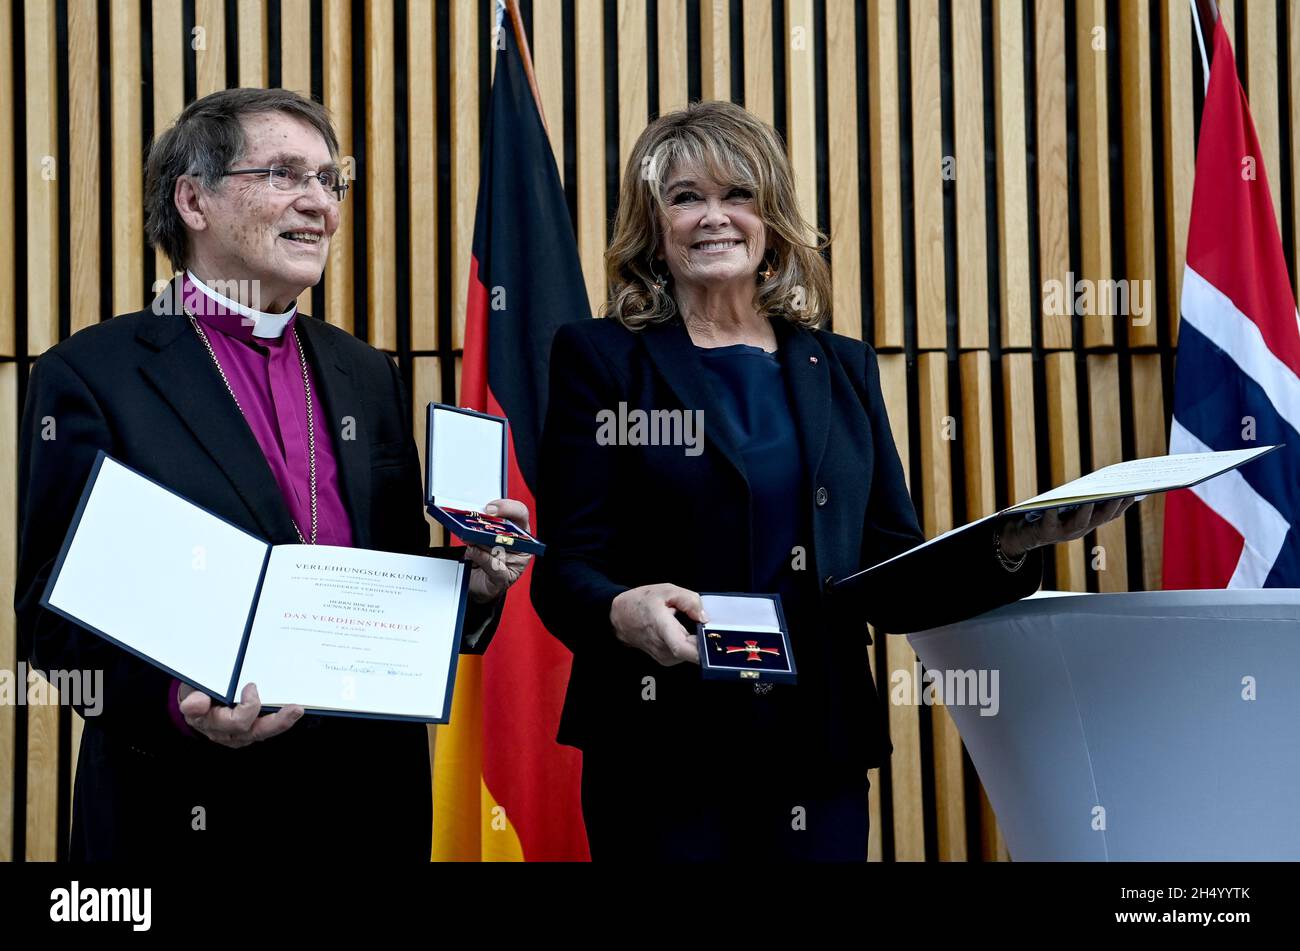 Oslo, Norway. 05th Nov, 2021. The singer and actress Wencke Myhre from Norway and Gunnar Stålsett, the former Bishop of Oslo, stand next to each other with the certificates in their hands after the awarding of the Federal Cross of Merit to them. Credit: Britta Pedersen/dpa-Zentralbild/dpa/Alamy Live News Stock Photo